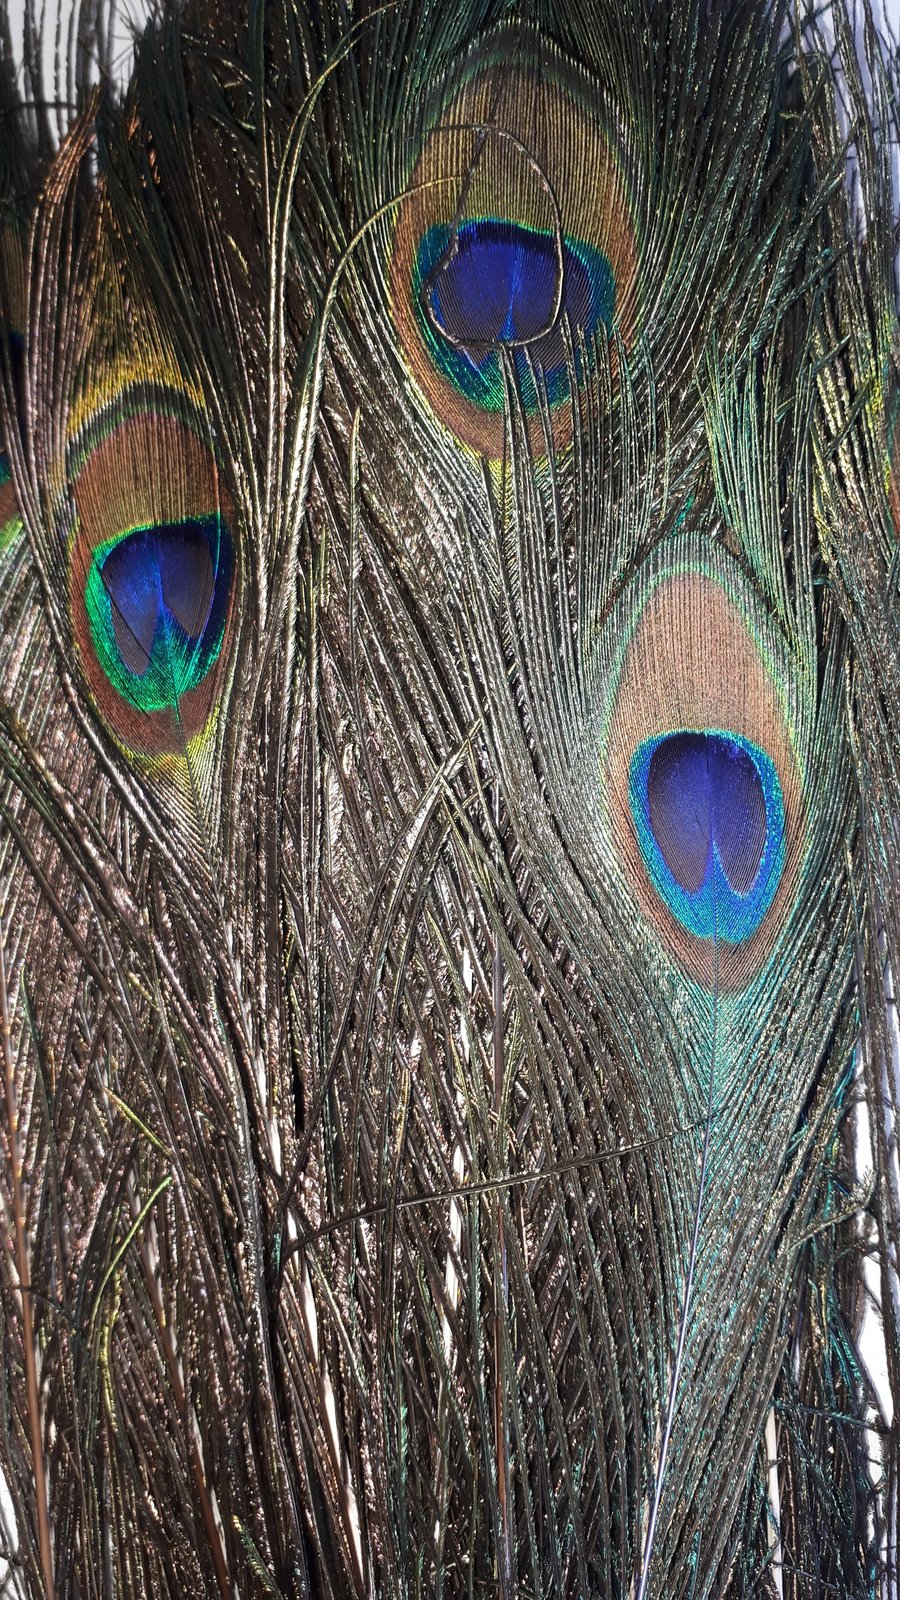 10 x 12 inch peacock feathers. Display costume jewellery making